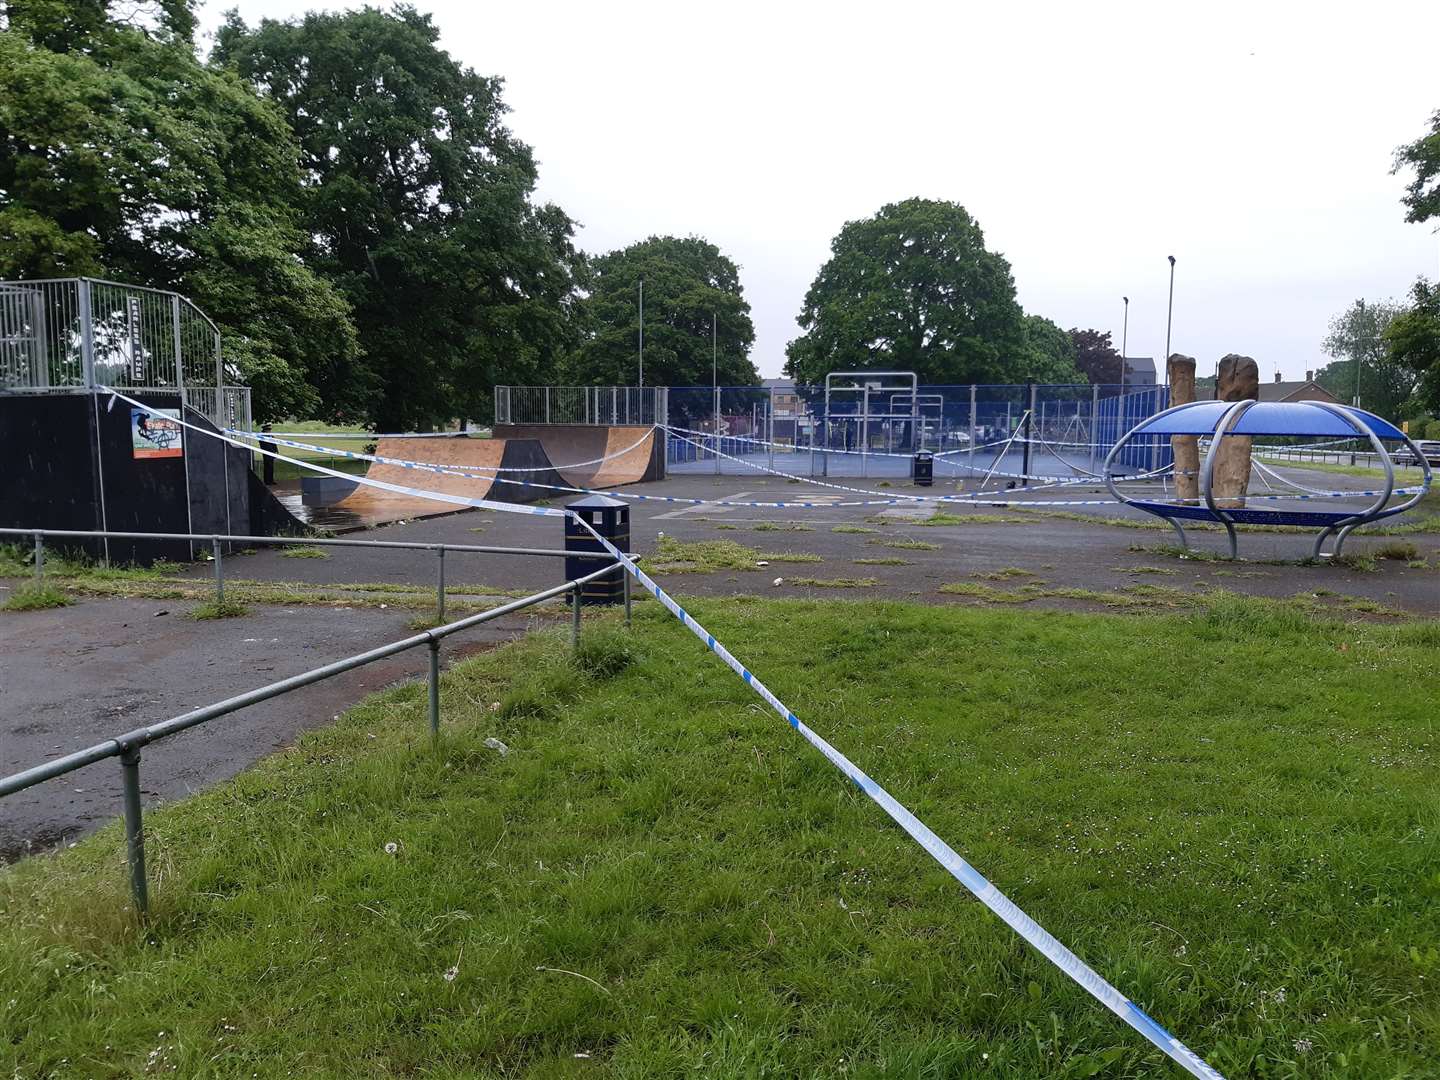 The Bicknor Road play area is taped off this morning